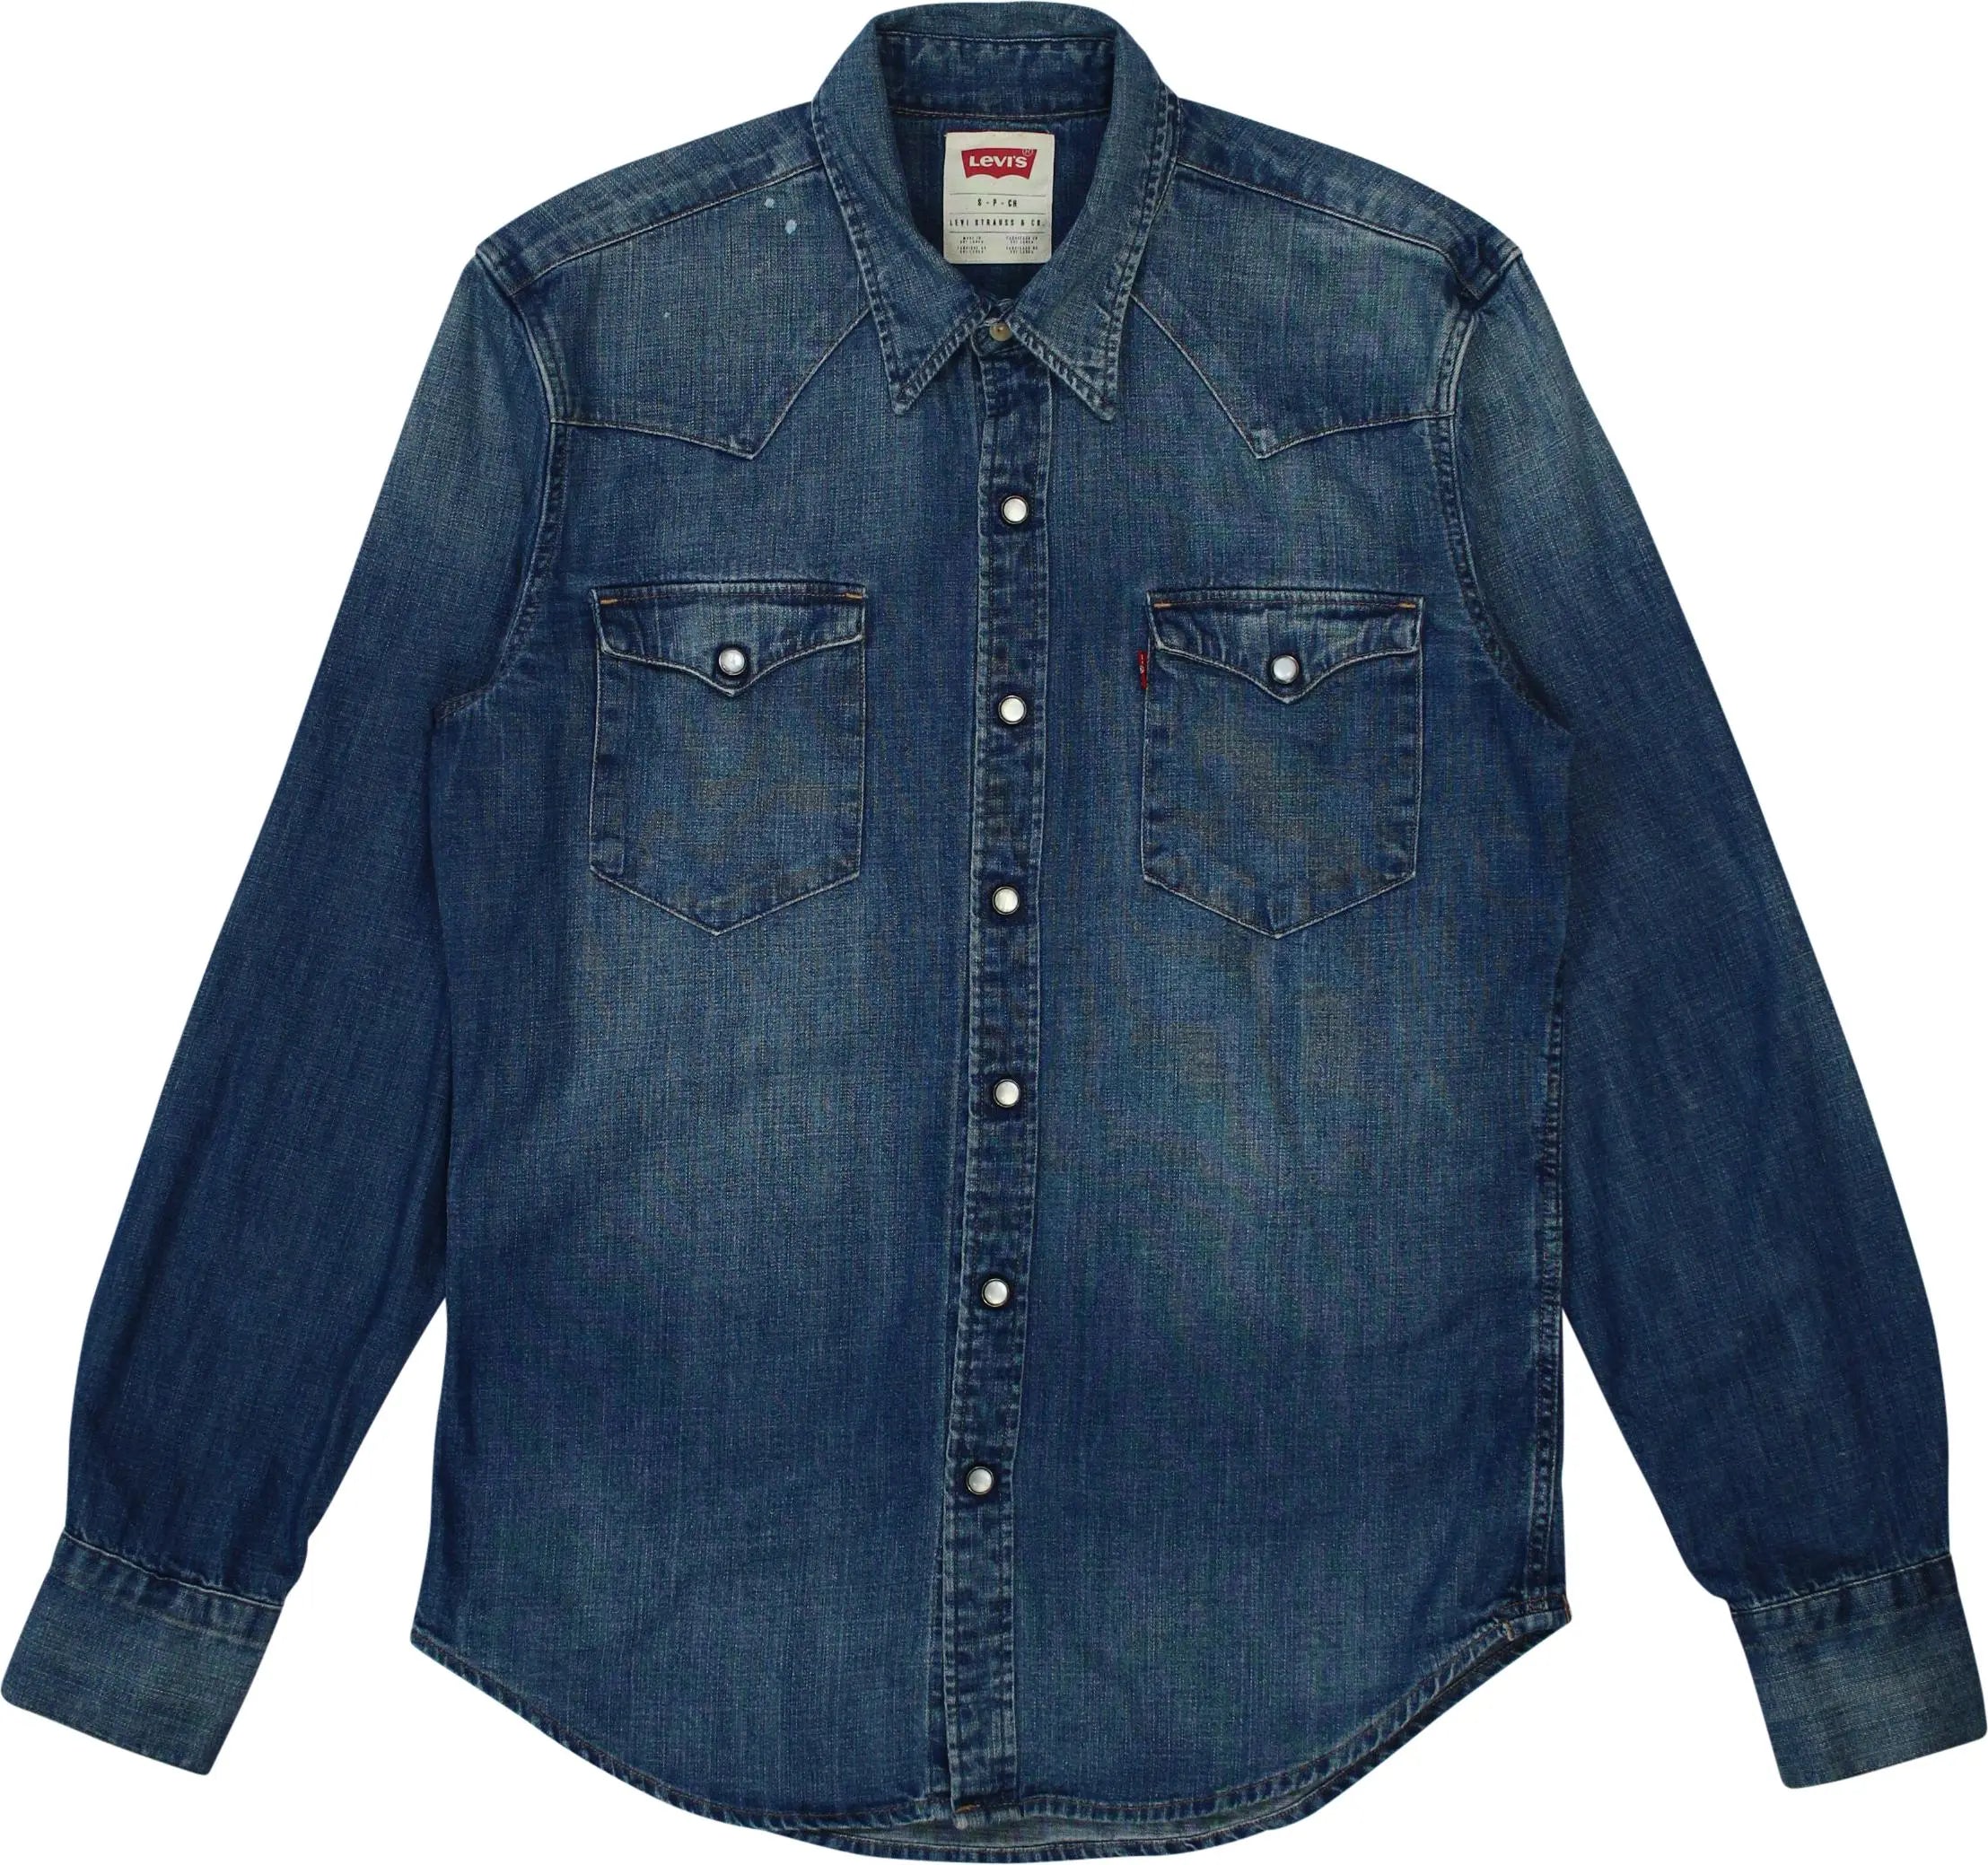 Levi's - Blue Denim Shirt by Levi's- ThriftTale.com - Vintage and second handclothing